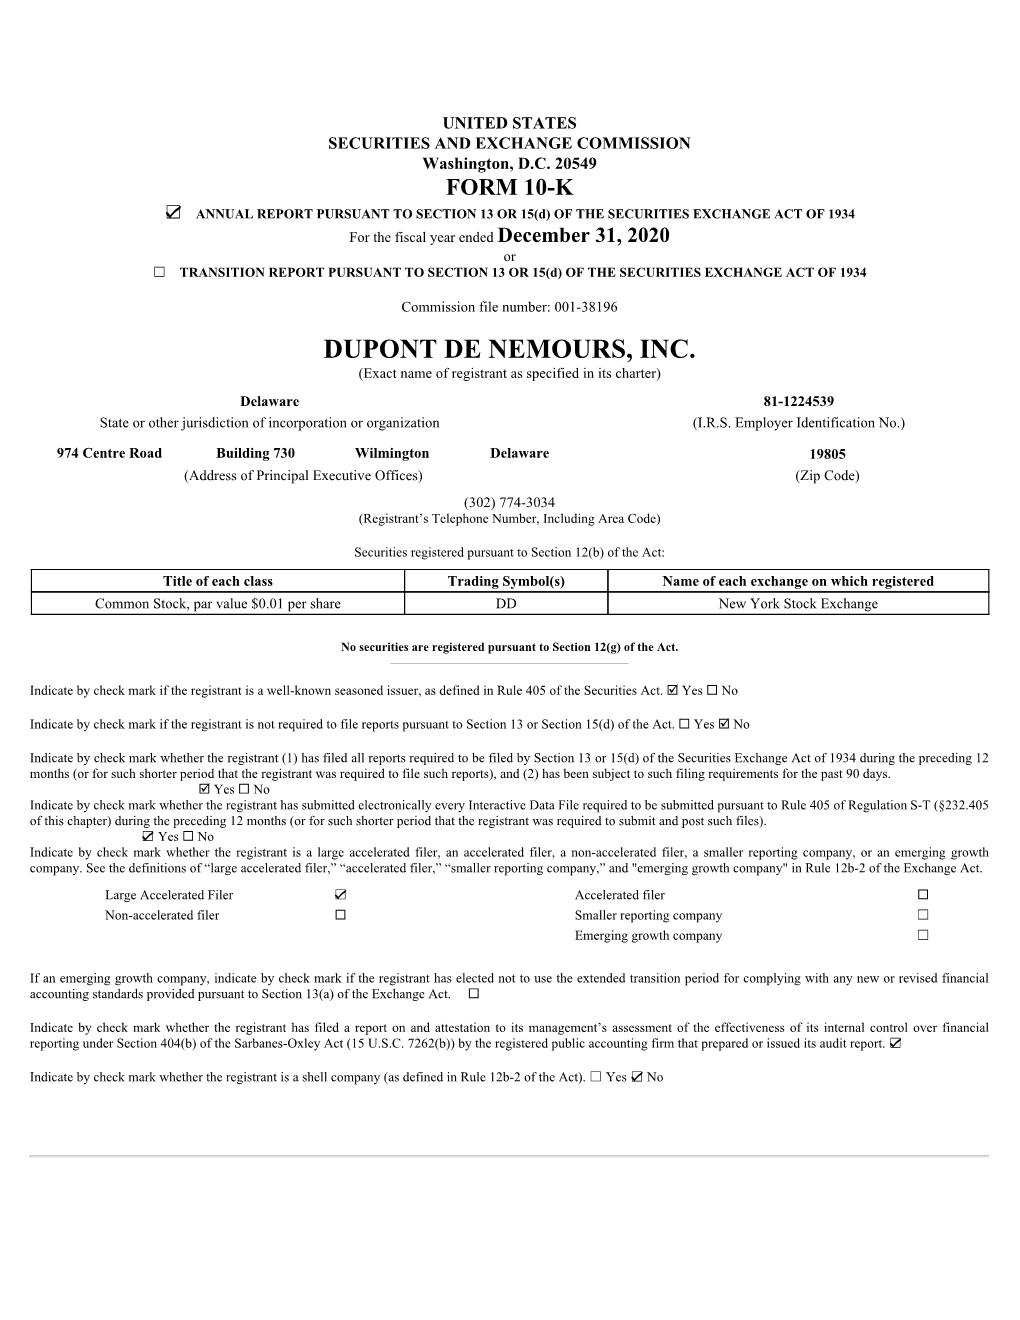 DUPONT DE NEMOURS, INC. (Exact Name of Registrant As Specified in Its Charter) Delaware 81-1224539 State Or Other Jurisdiction of Incorporation Or Organization (I.R.S